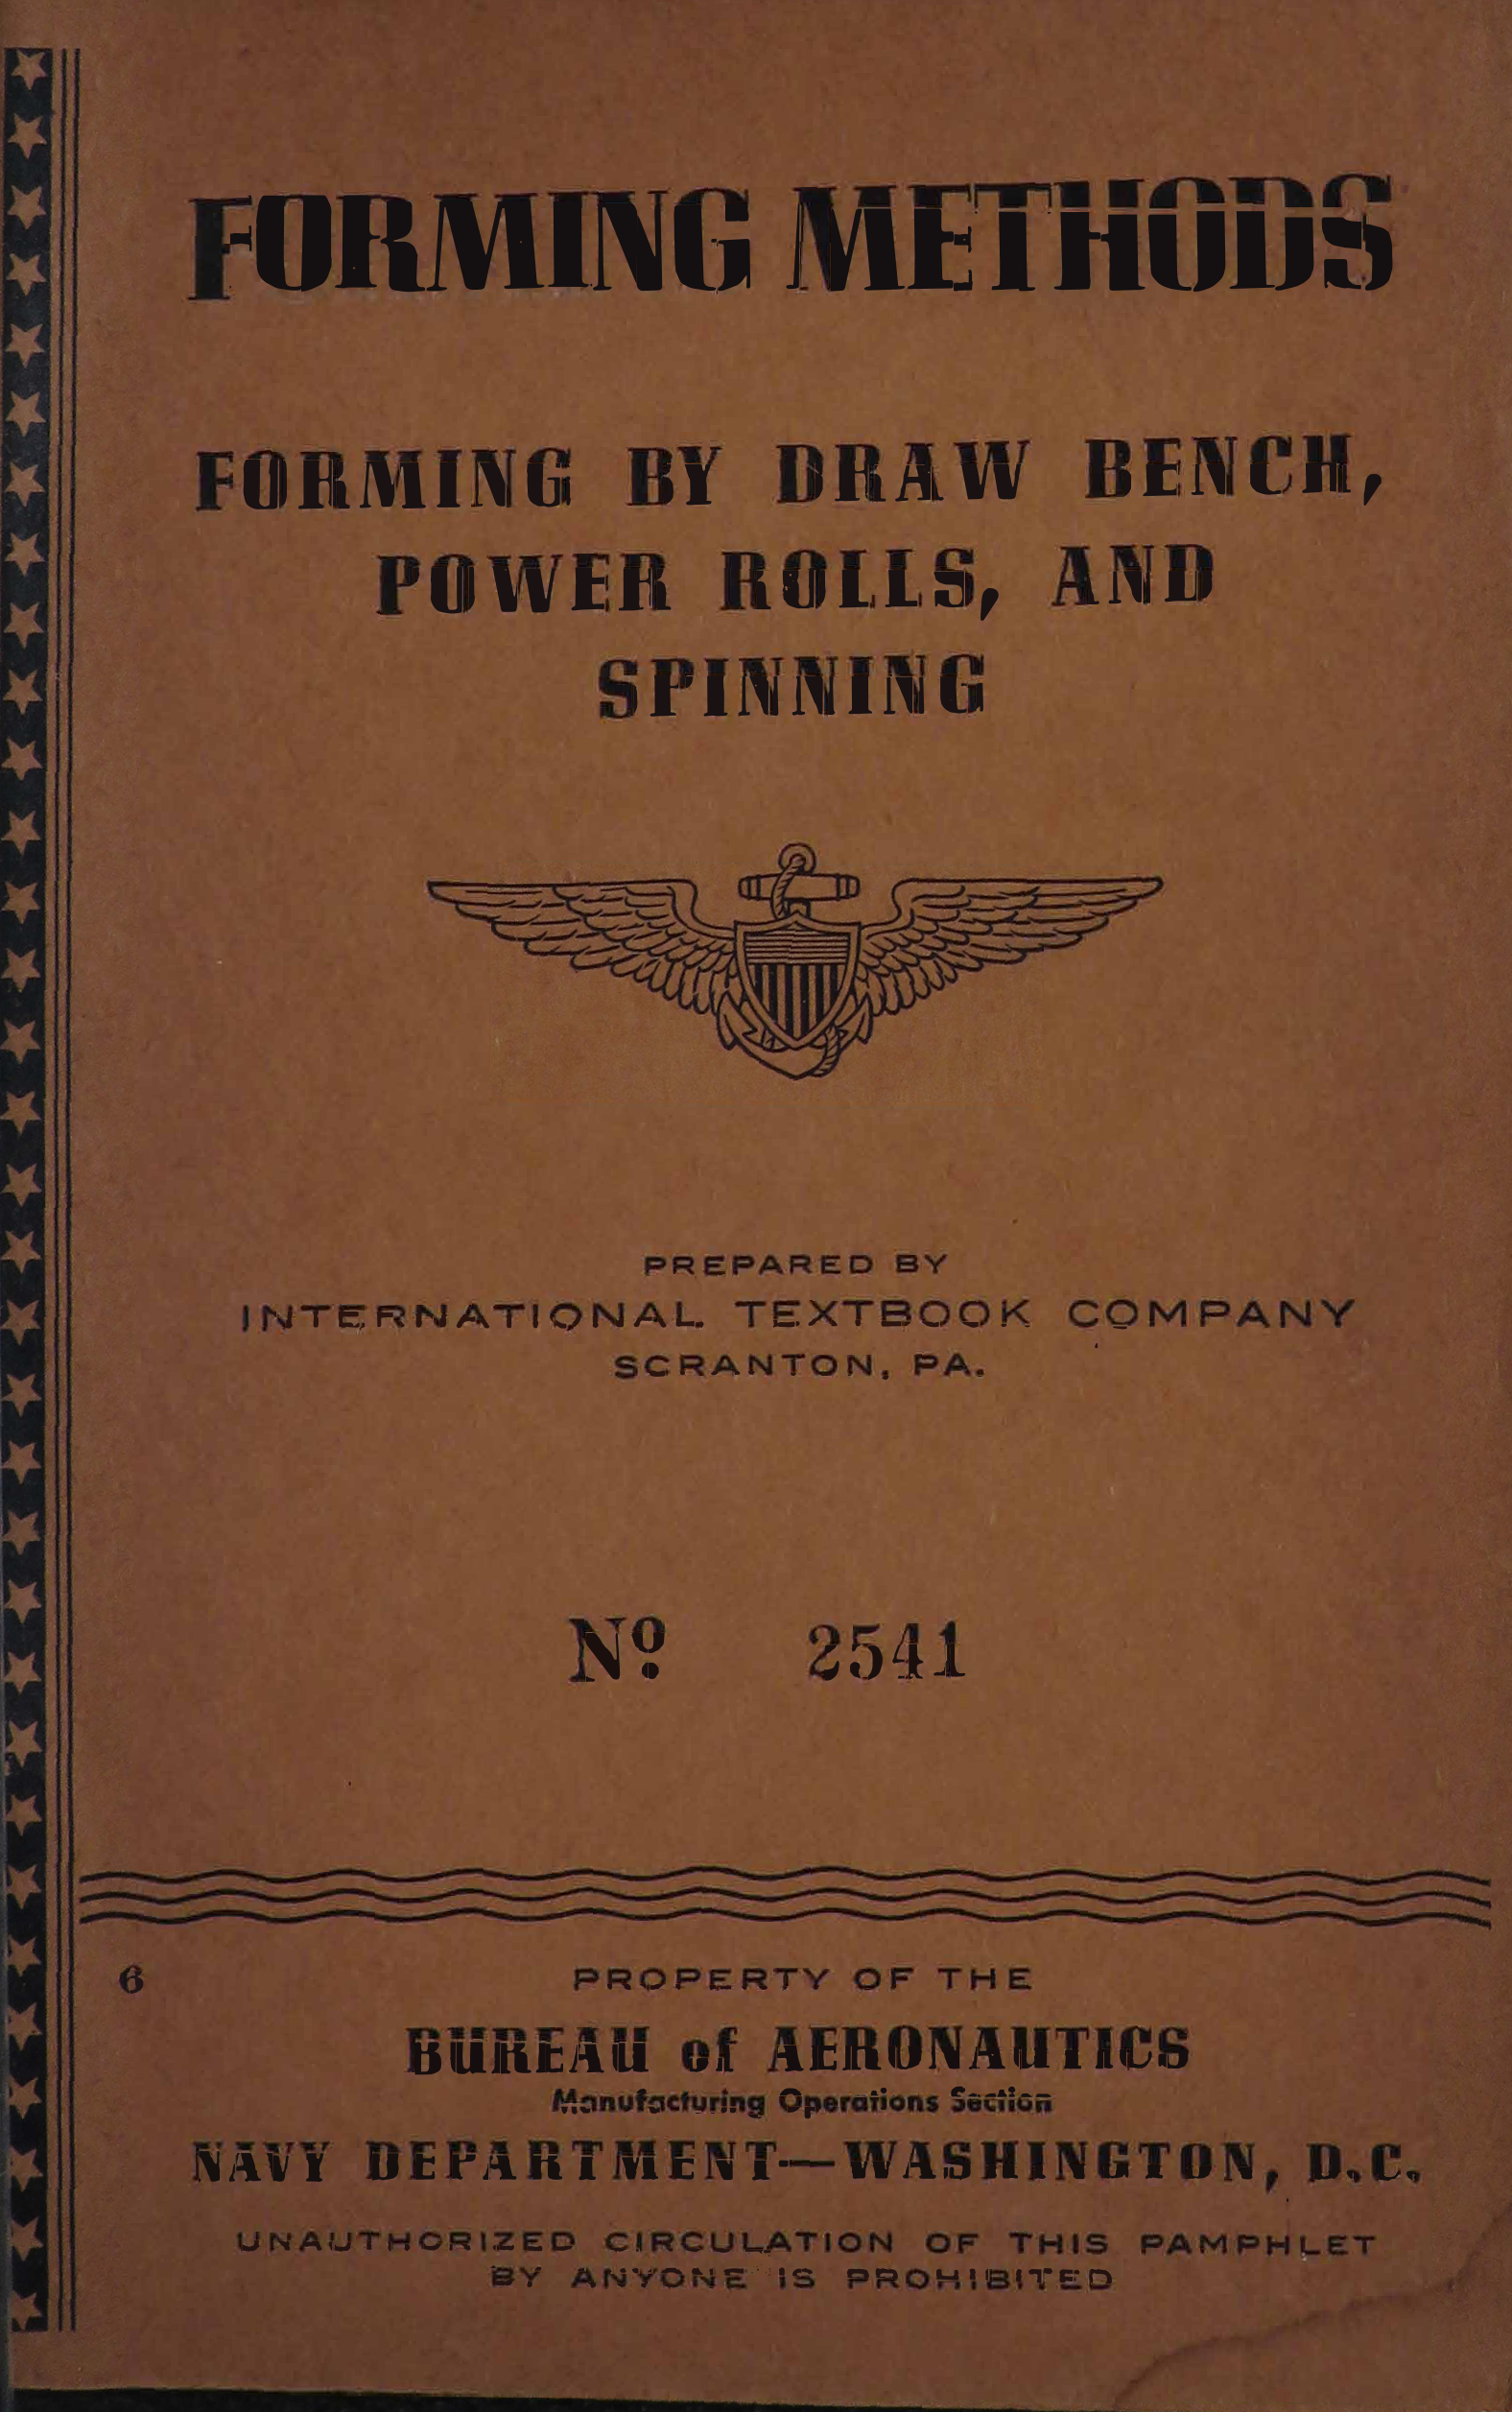 Sample page 1 from AirCorps Library document: Forming Methods - Forming By Draw Bench, Power Rolls and Spinning - Bureau of Aeronautics